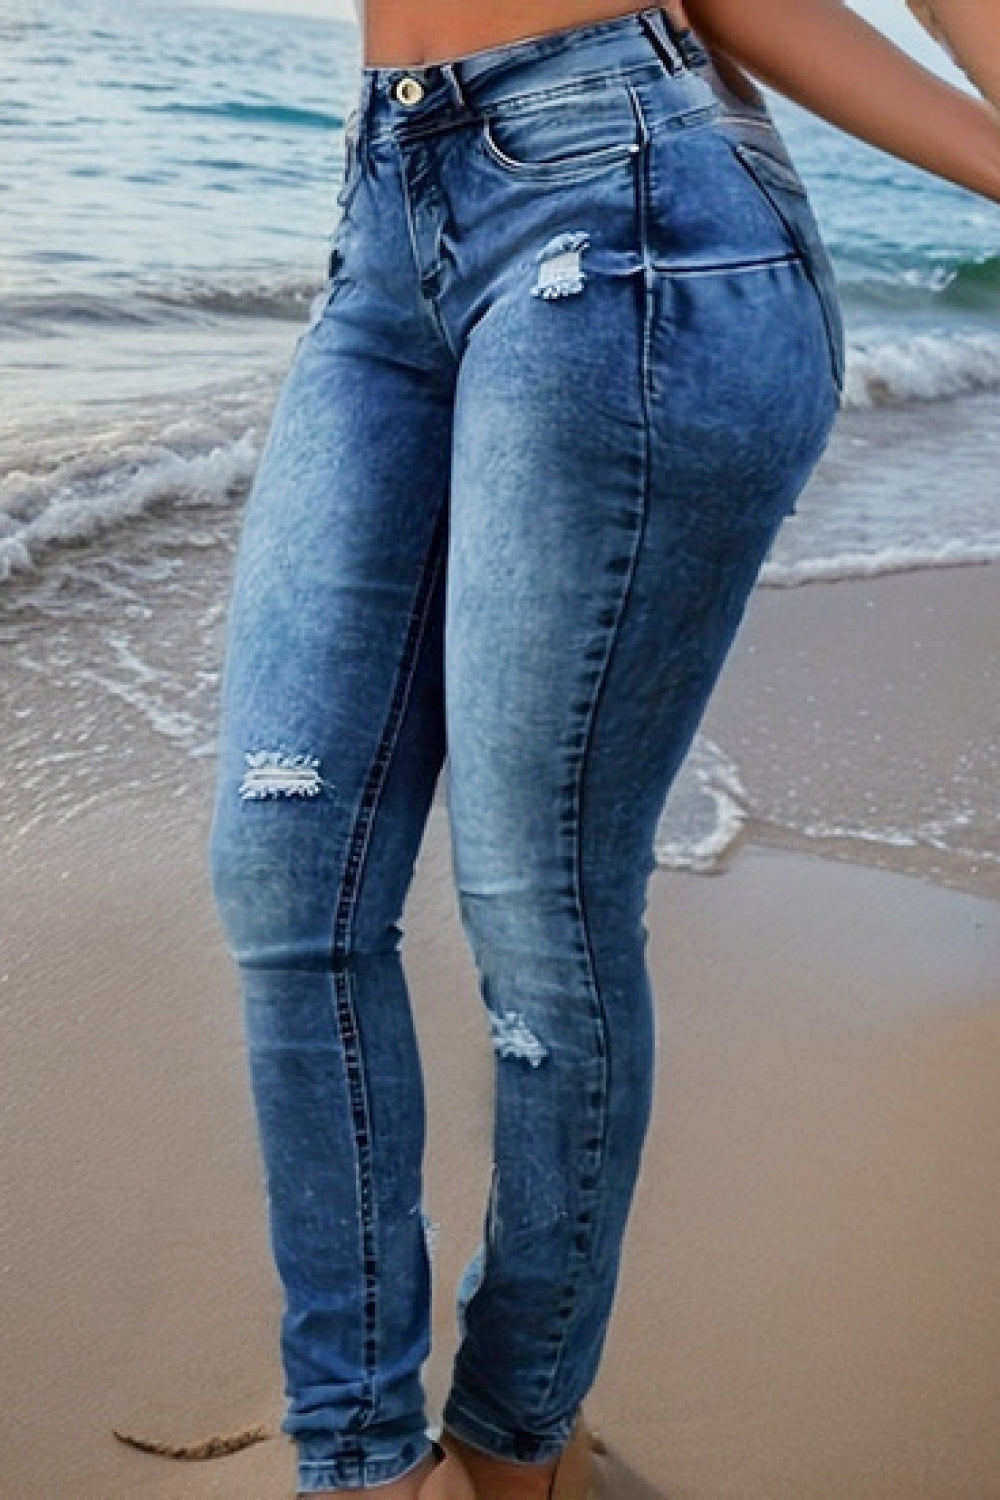 Distressed Long Jeans